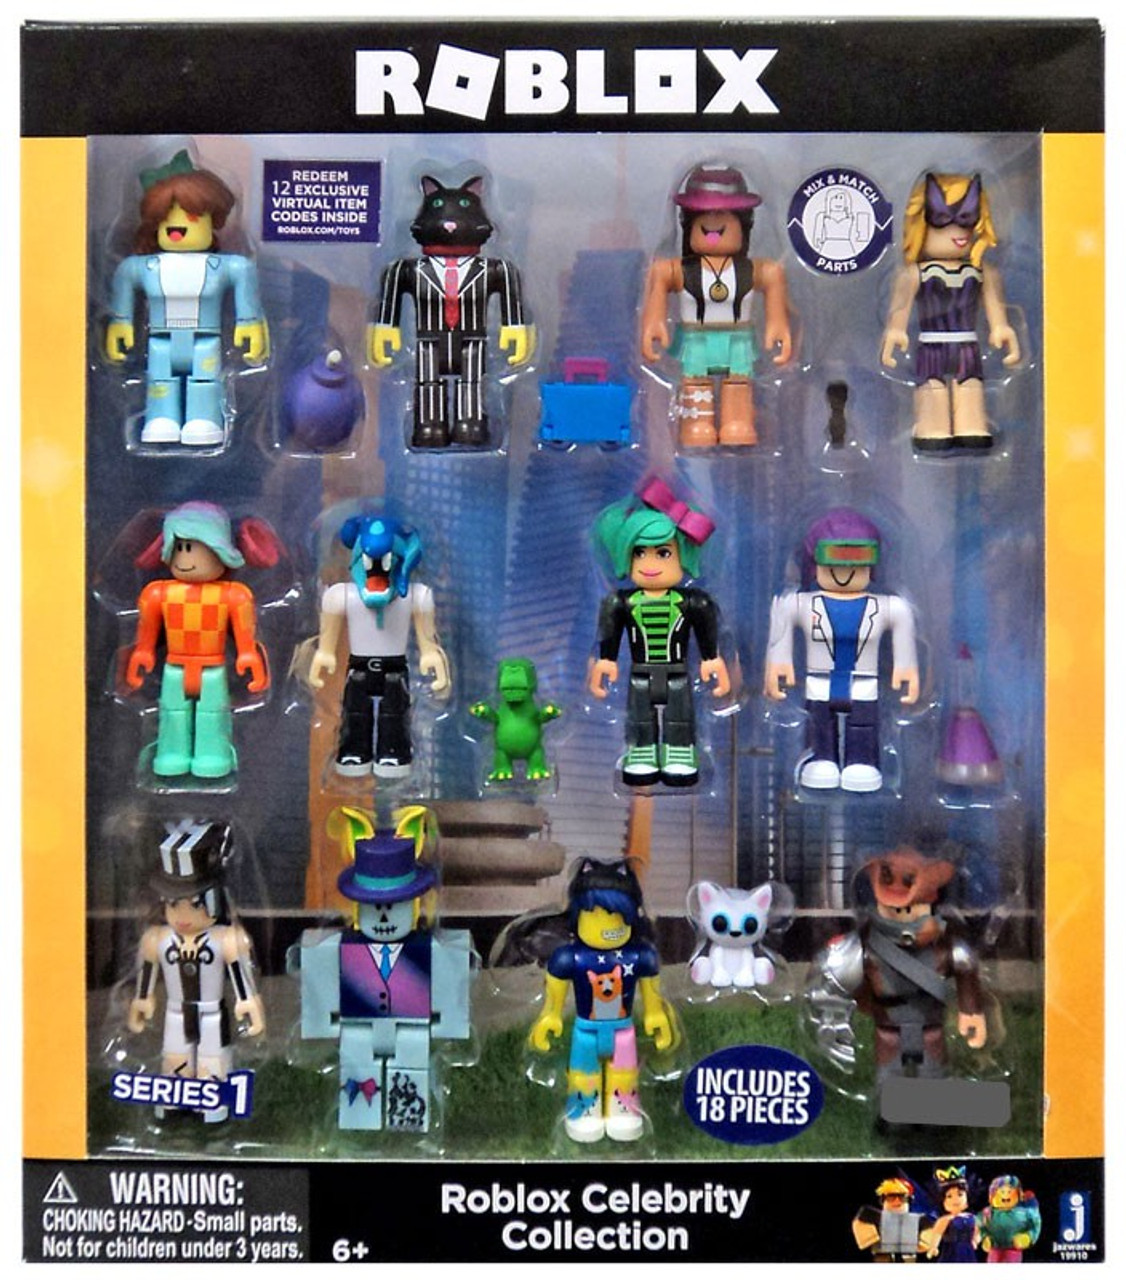 Roblox Series 1 Celebrity Collection Exclusive 3 Action Figure 12 Pack Jazwares Toywiz - roblox character figures